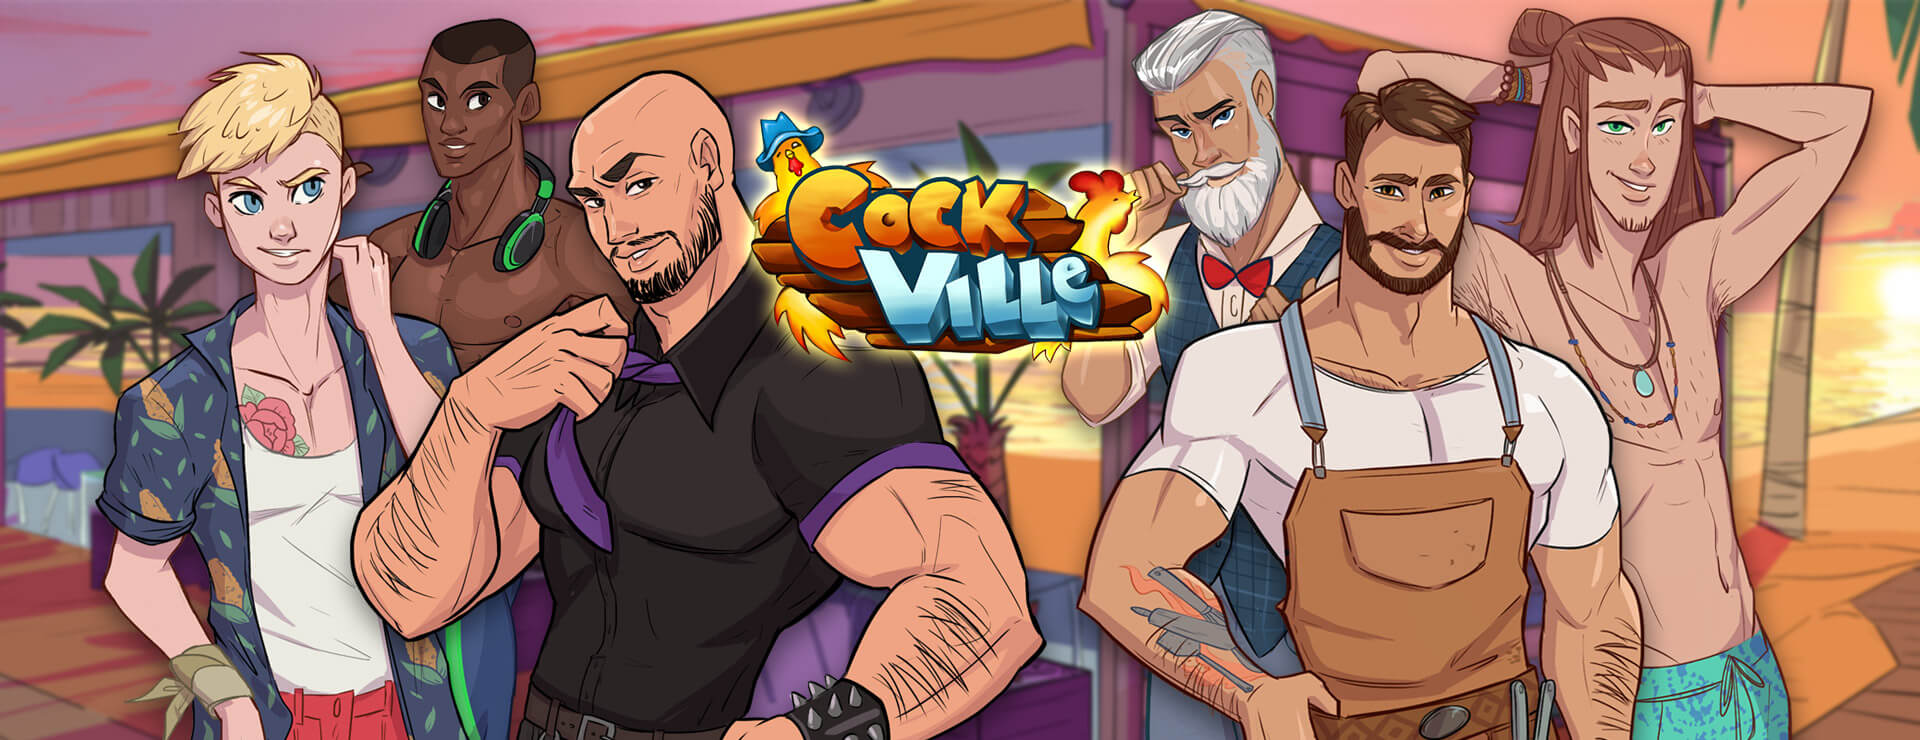 Cockville - Dating Sim Game